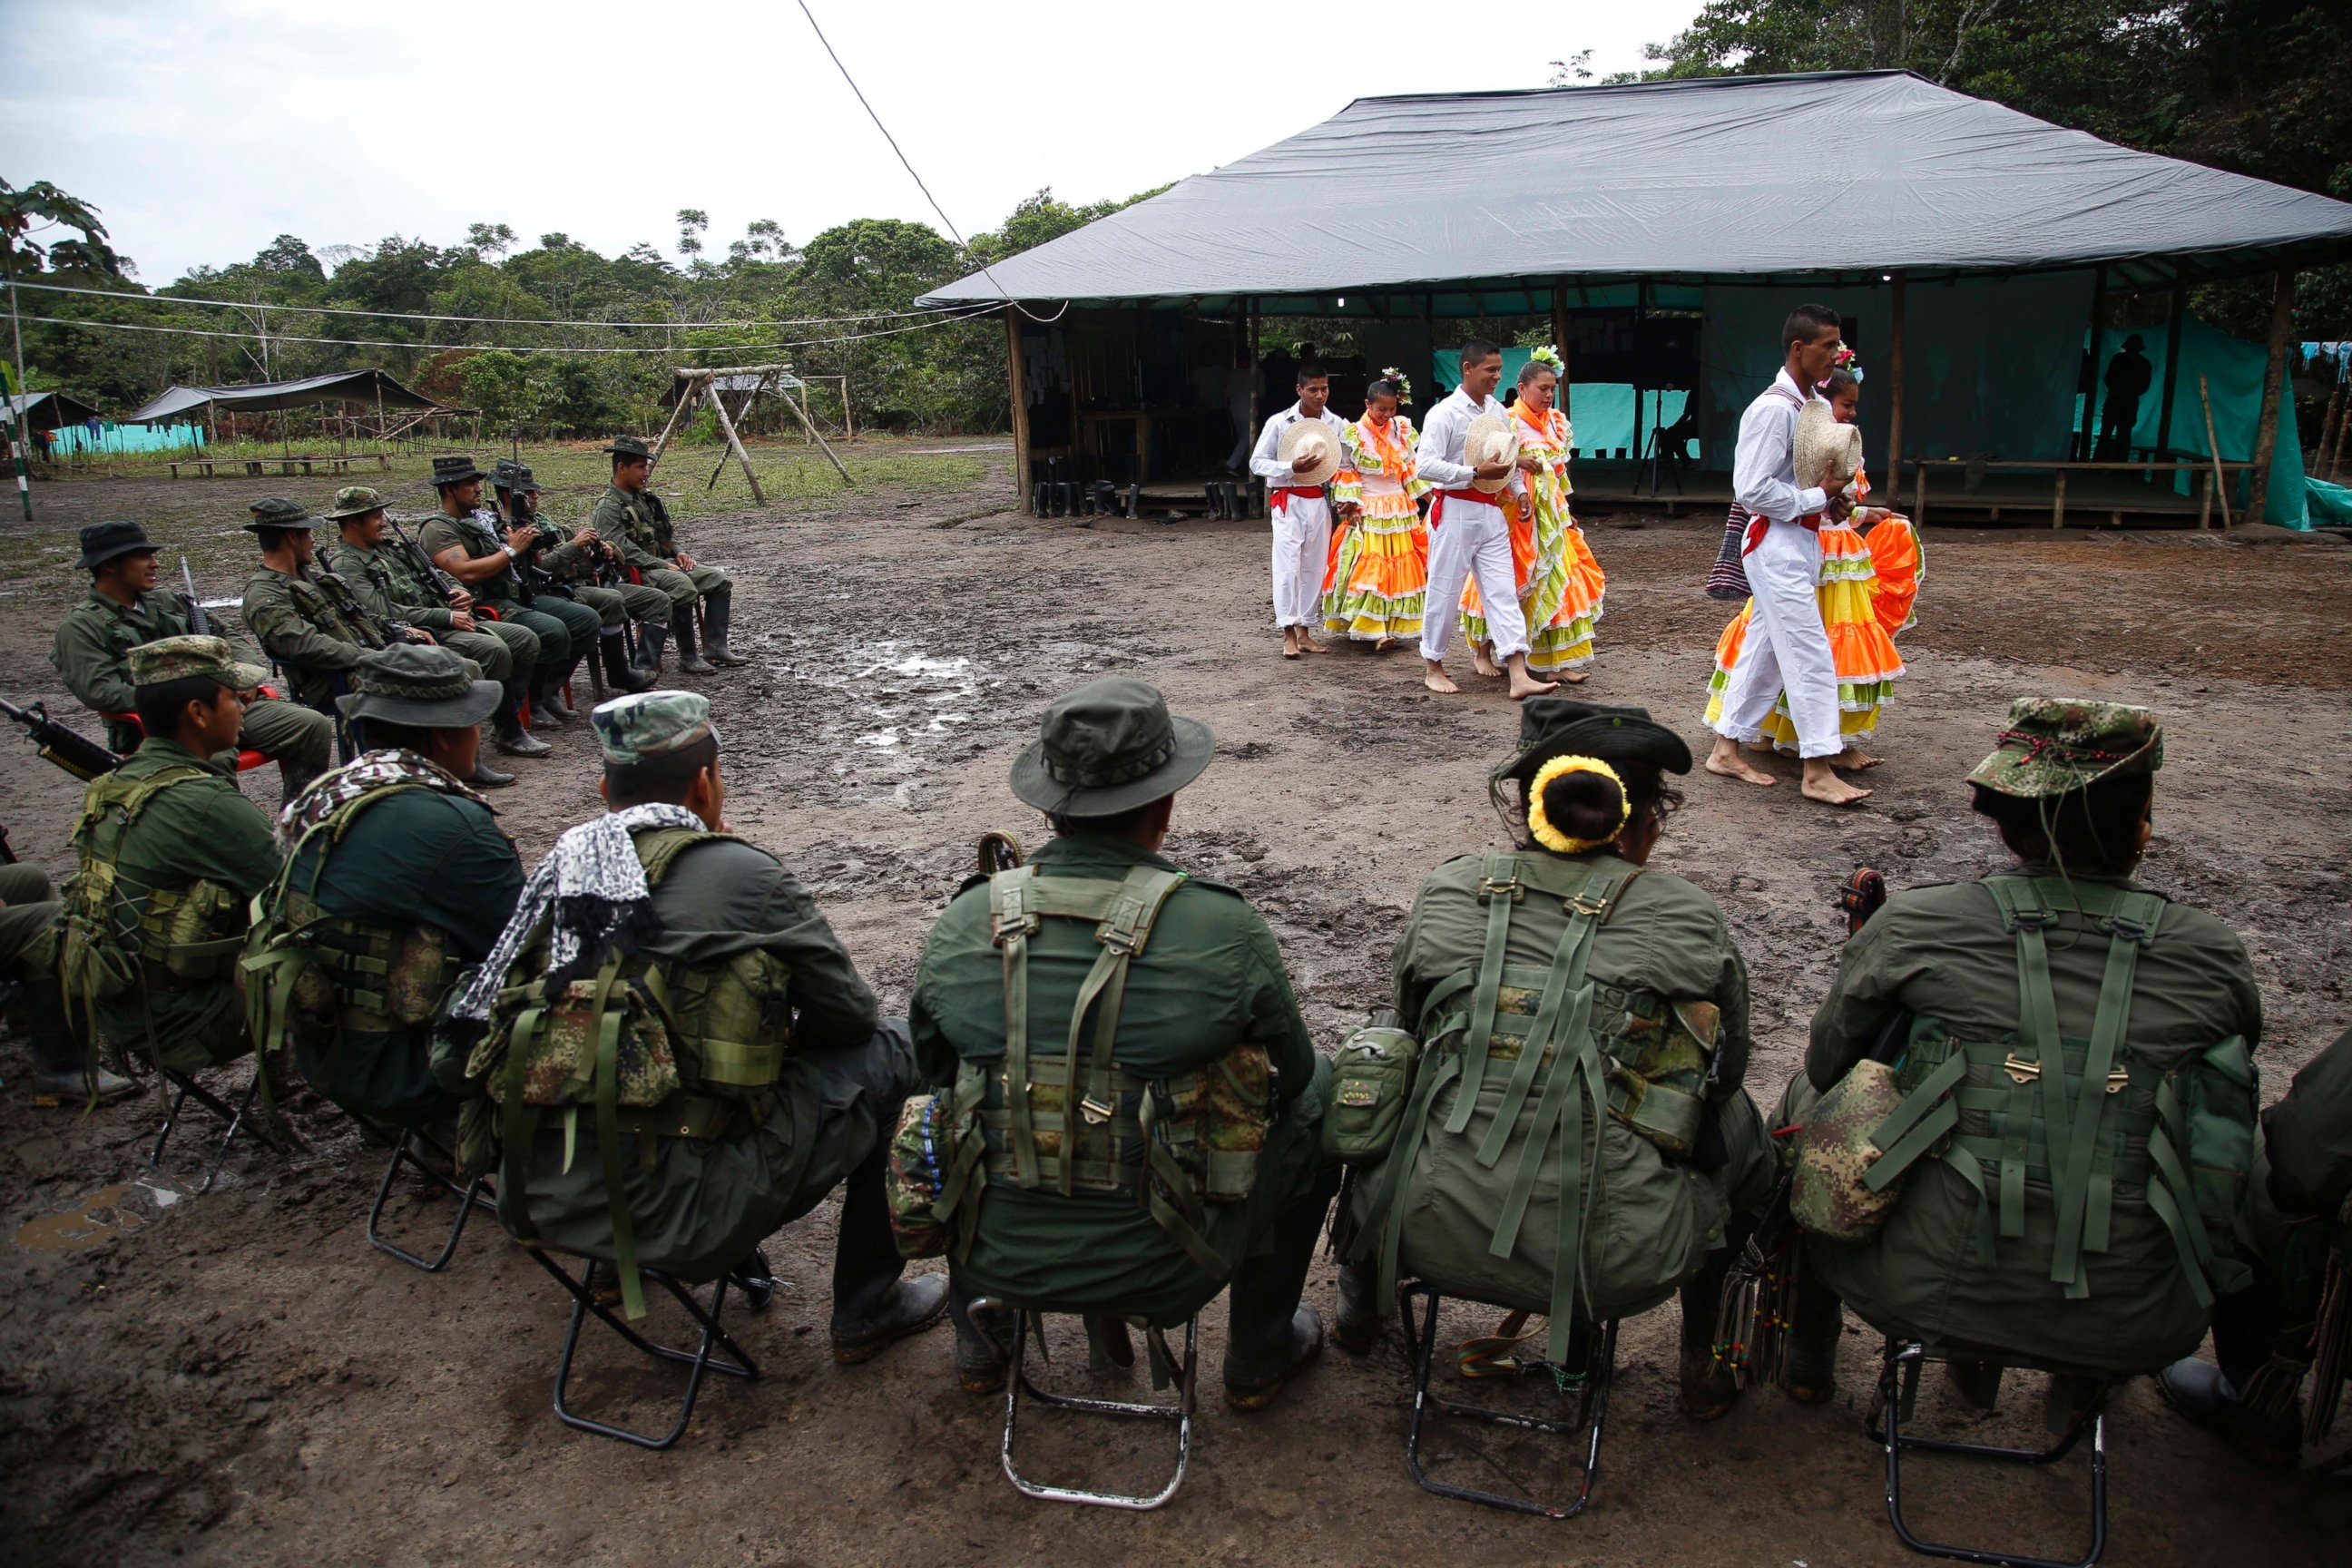 PHOTO: Rebels of the the 32nd Front of the Revolutionary Armed Forces of Colombia perform folk dances in front of their comrades at their camp in the southern jungles of Putumayo, Colombia, Aug. 11, 2016.